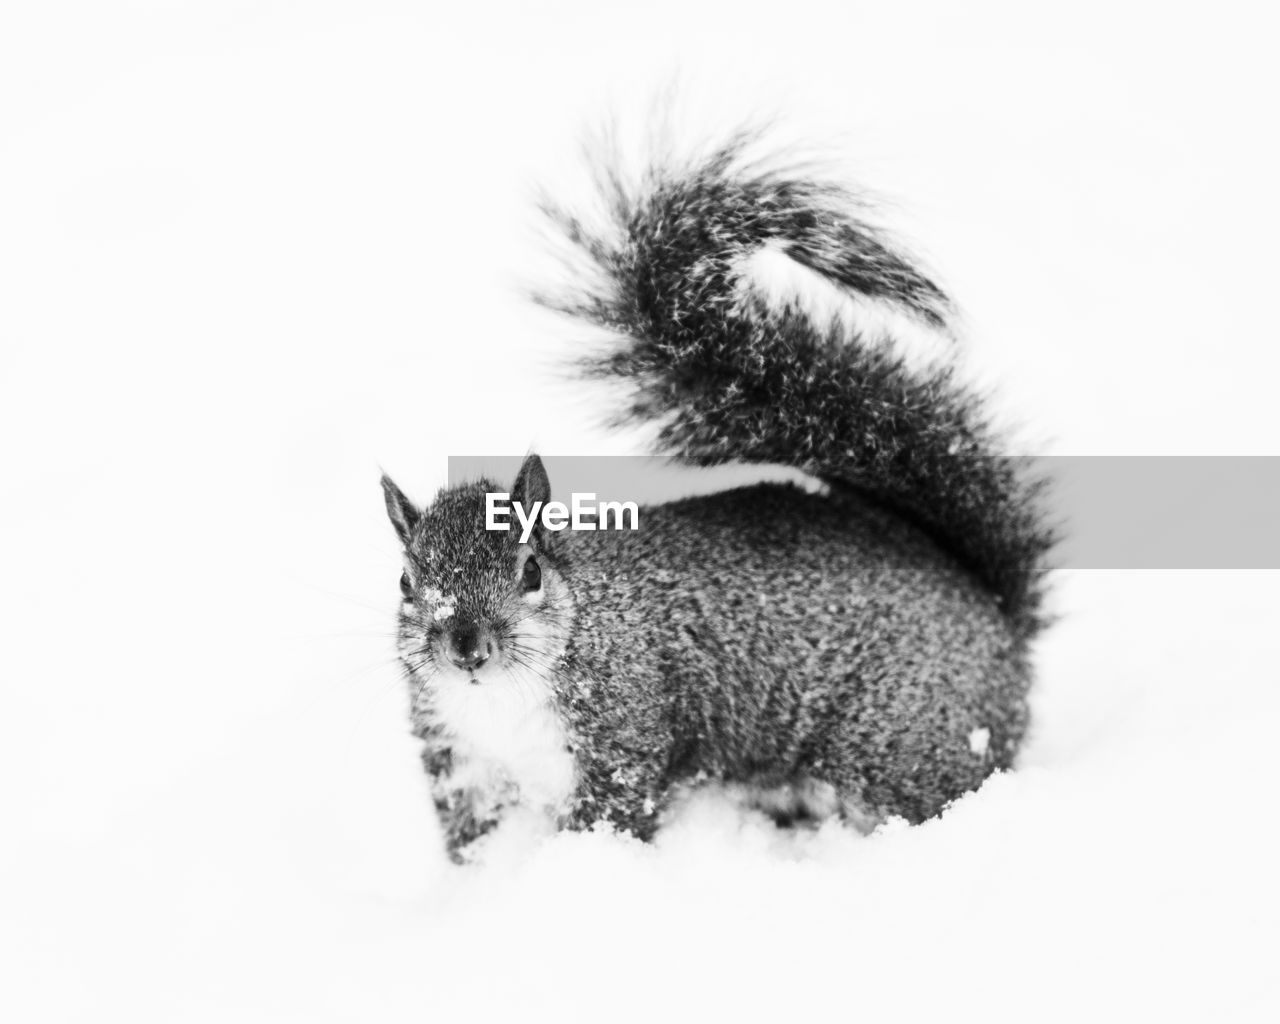 Portrait of squirrel on snow against white background